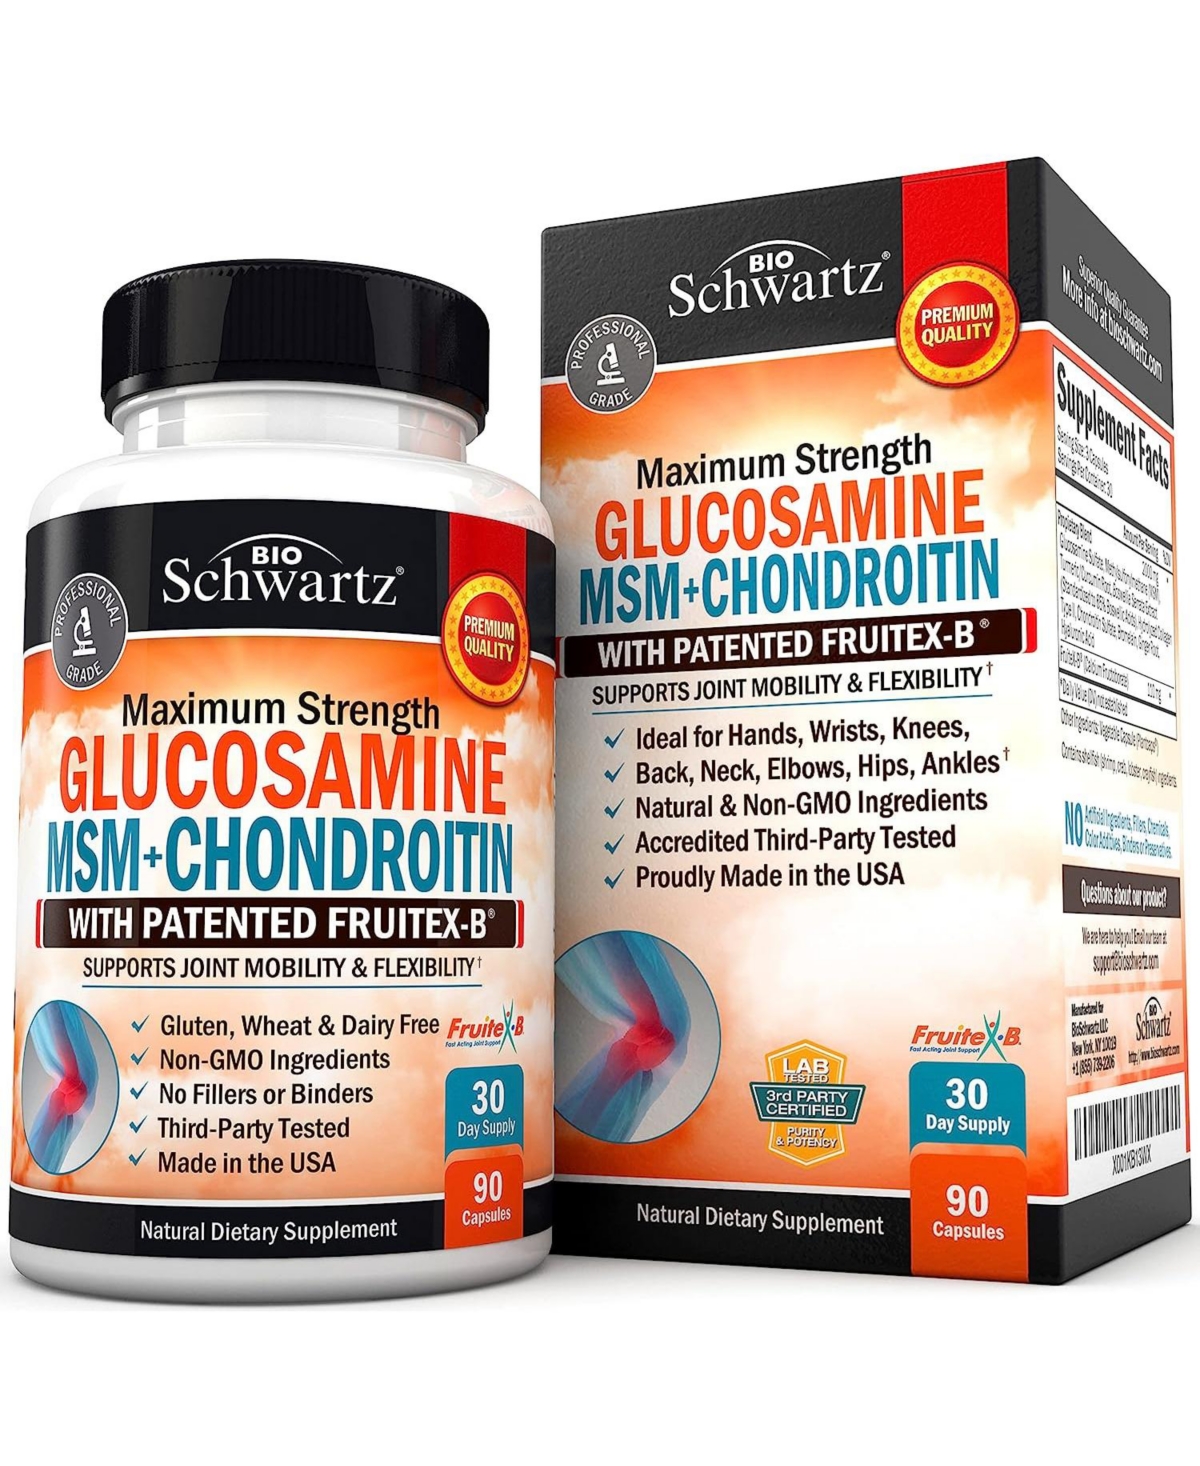 Glucosamine Chondroitin Msm 2110mg - Joint Support Supplement with Turmeric Curcumin for Hands Back Knee & Joint Health for Men & Women - Gluten-Free